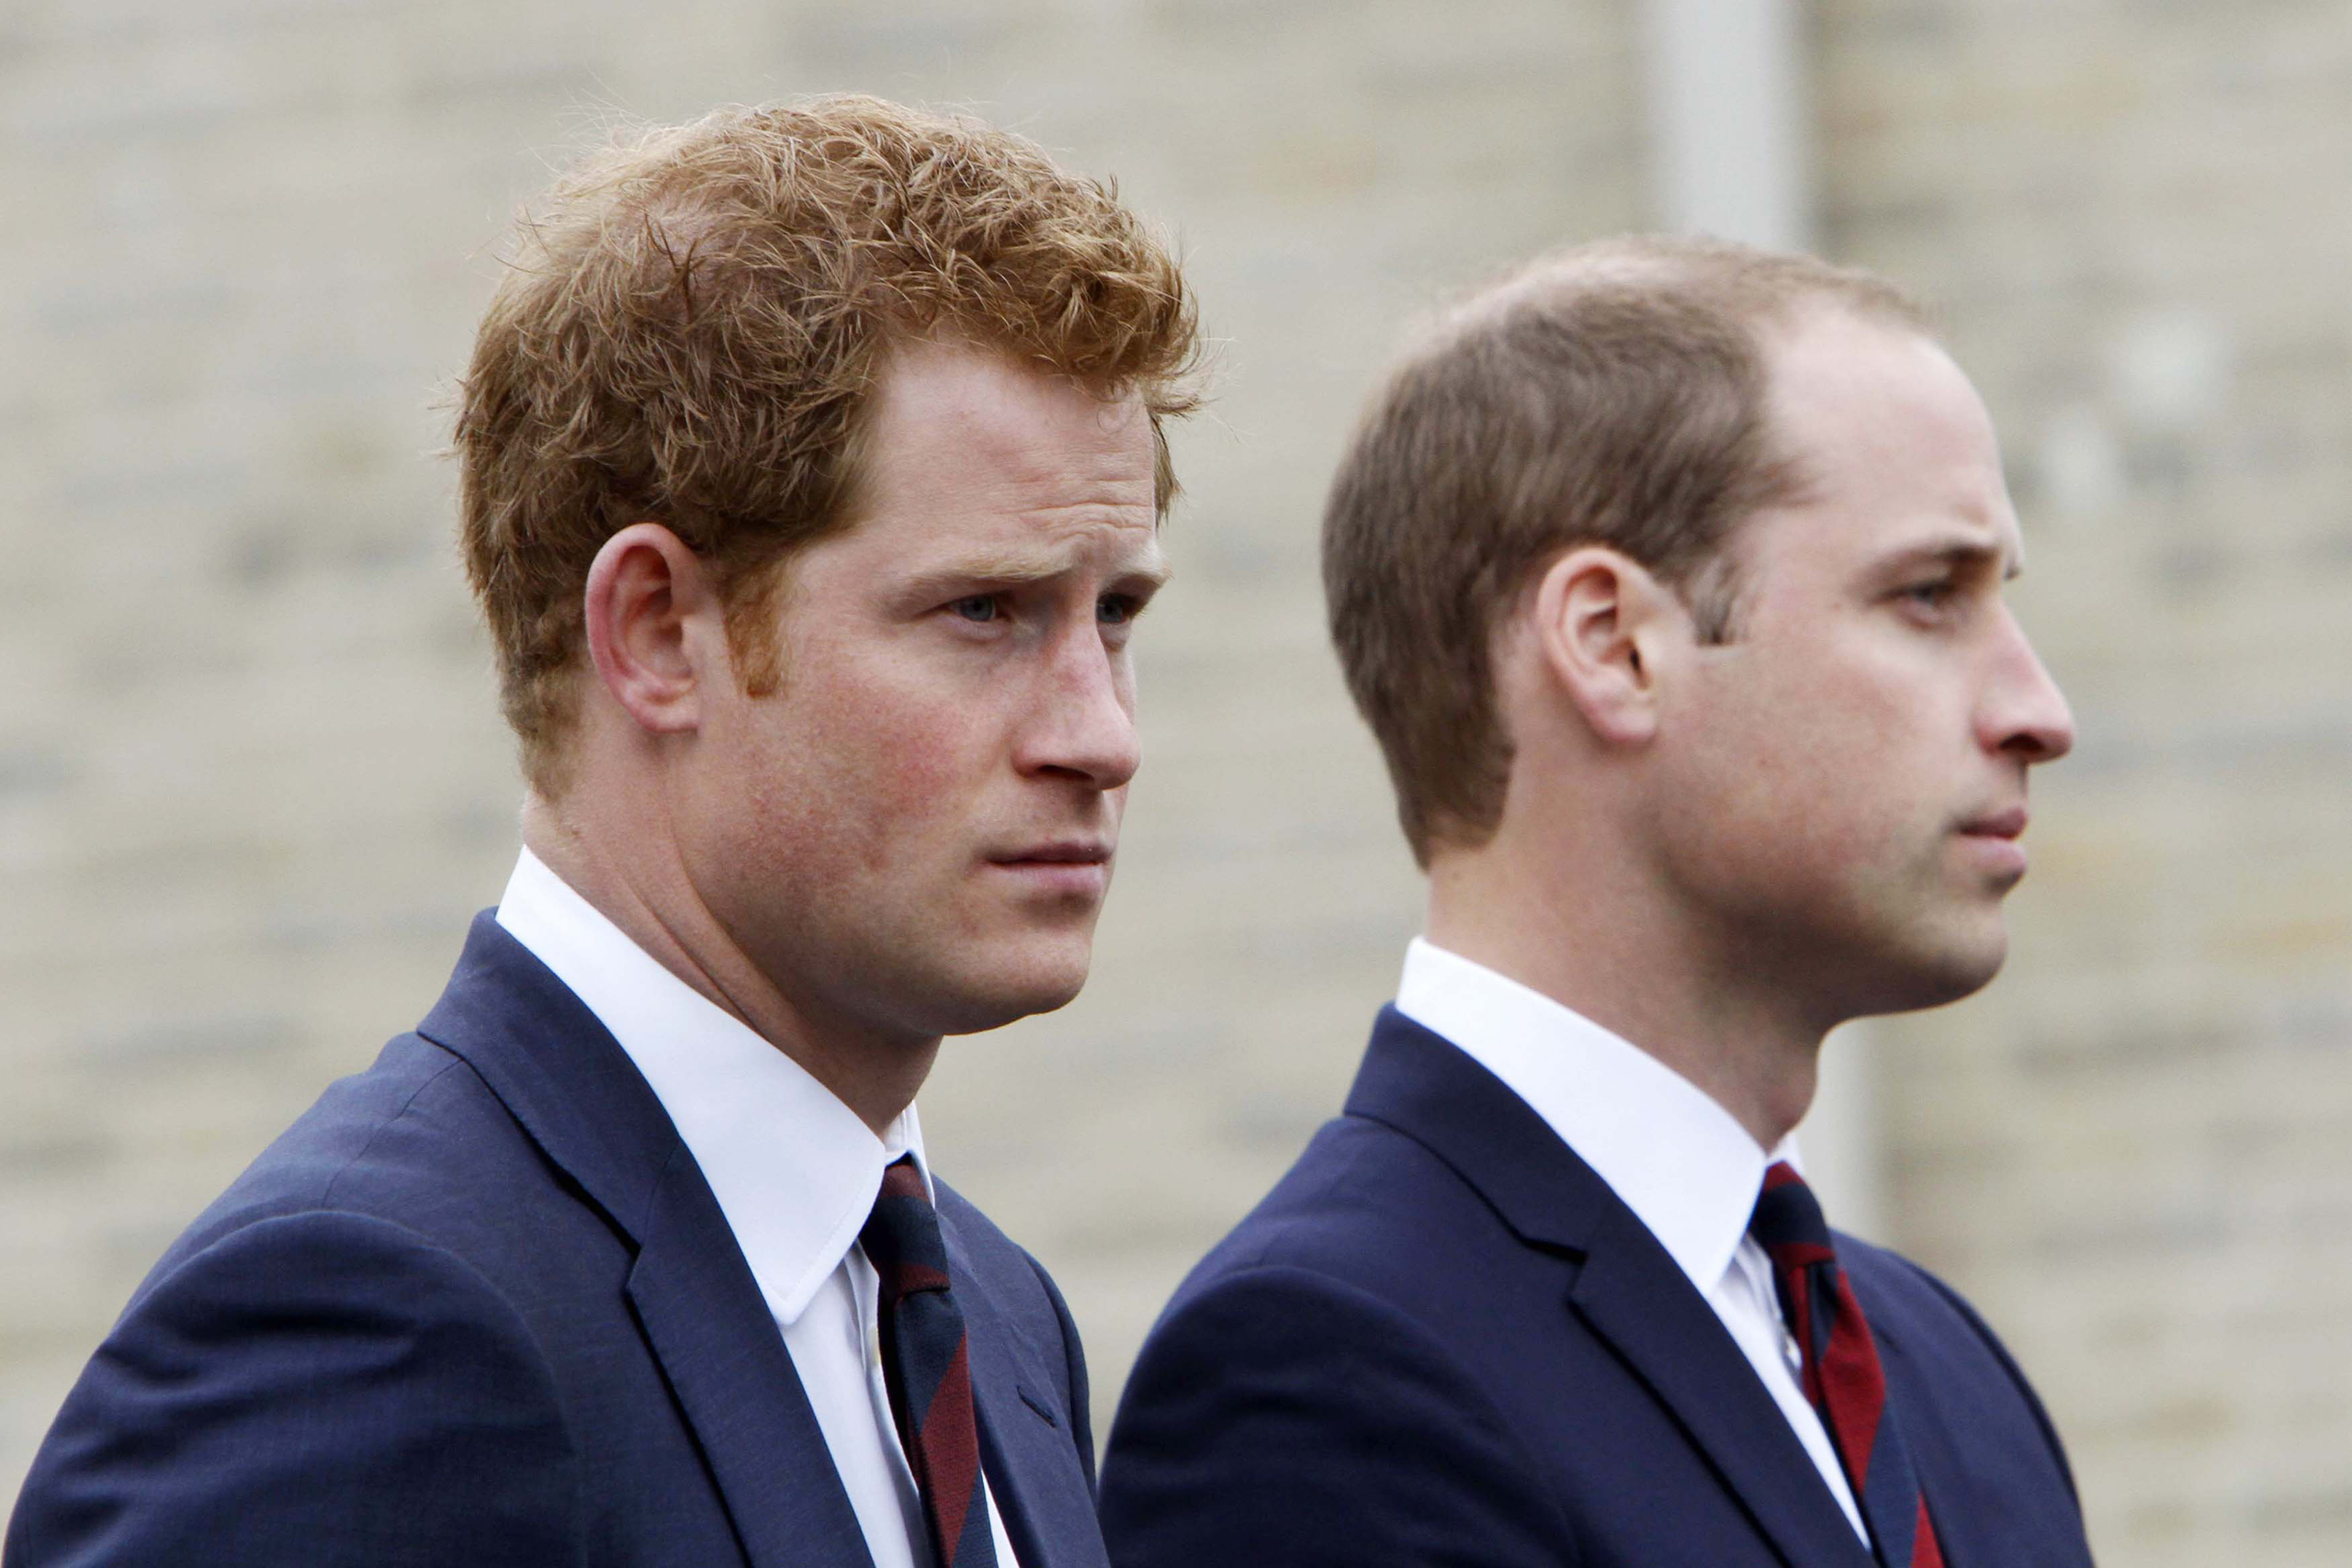 britain 039 s princes harry l and william attend the opening of the help for heroes recovery centre for injured service personnel at tedworth house in wiltshire south western england may 20 2013 reuters pool mark richards royals military   rtxztz8